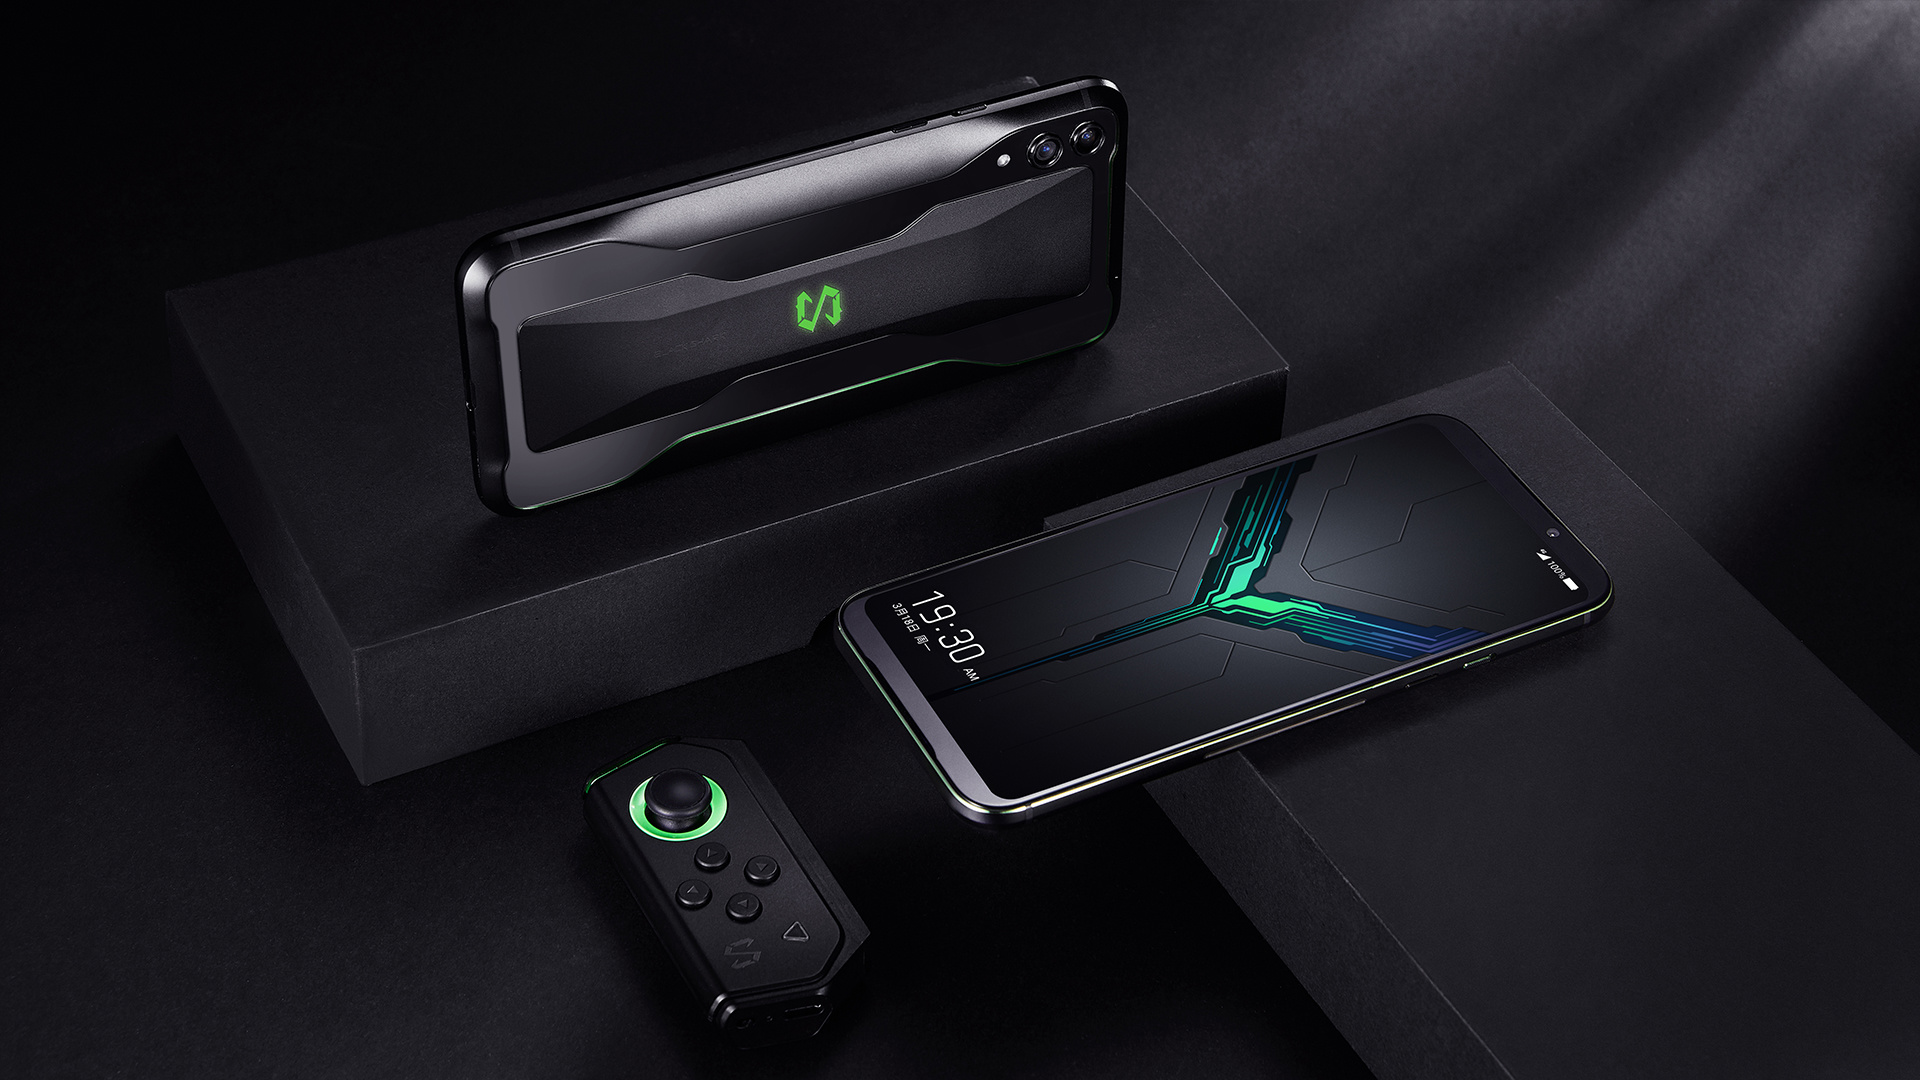 Xiaomi Black Shark 2: Specs, features, availability, and more